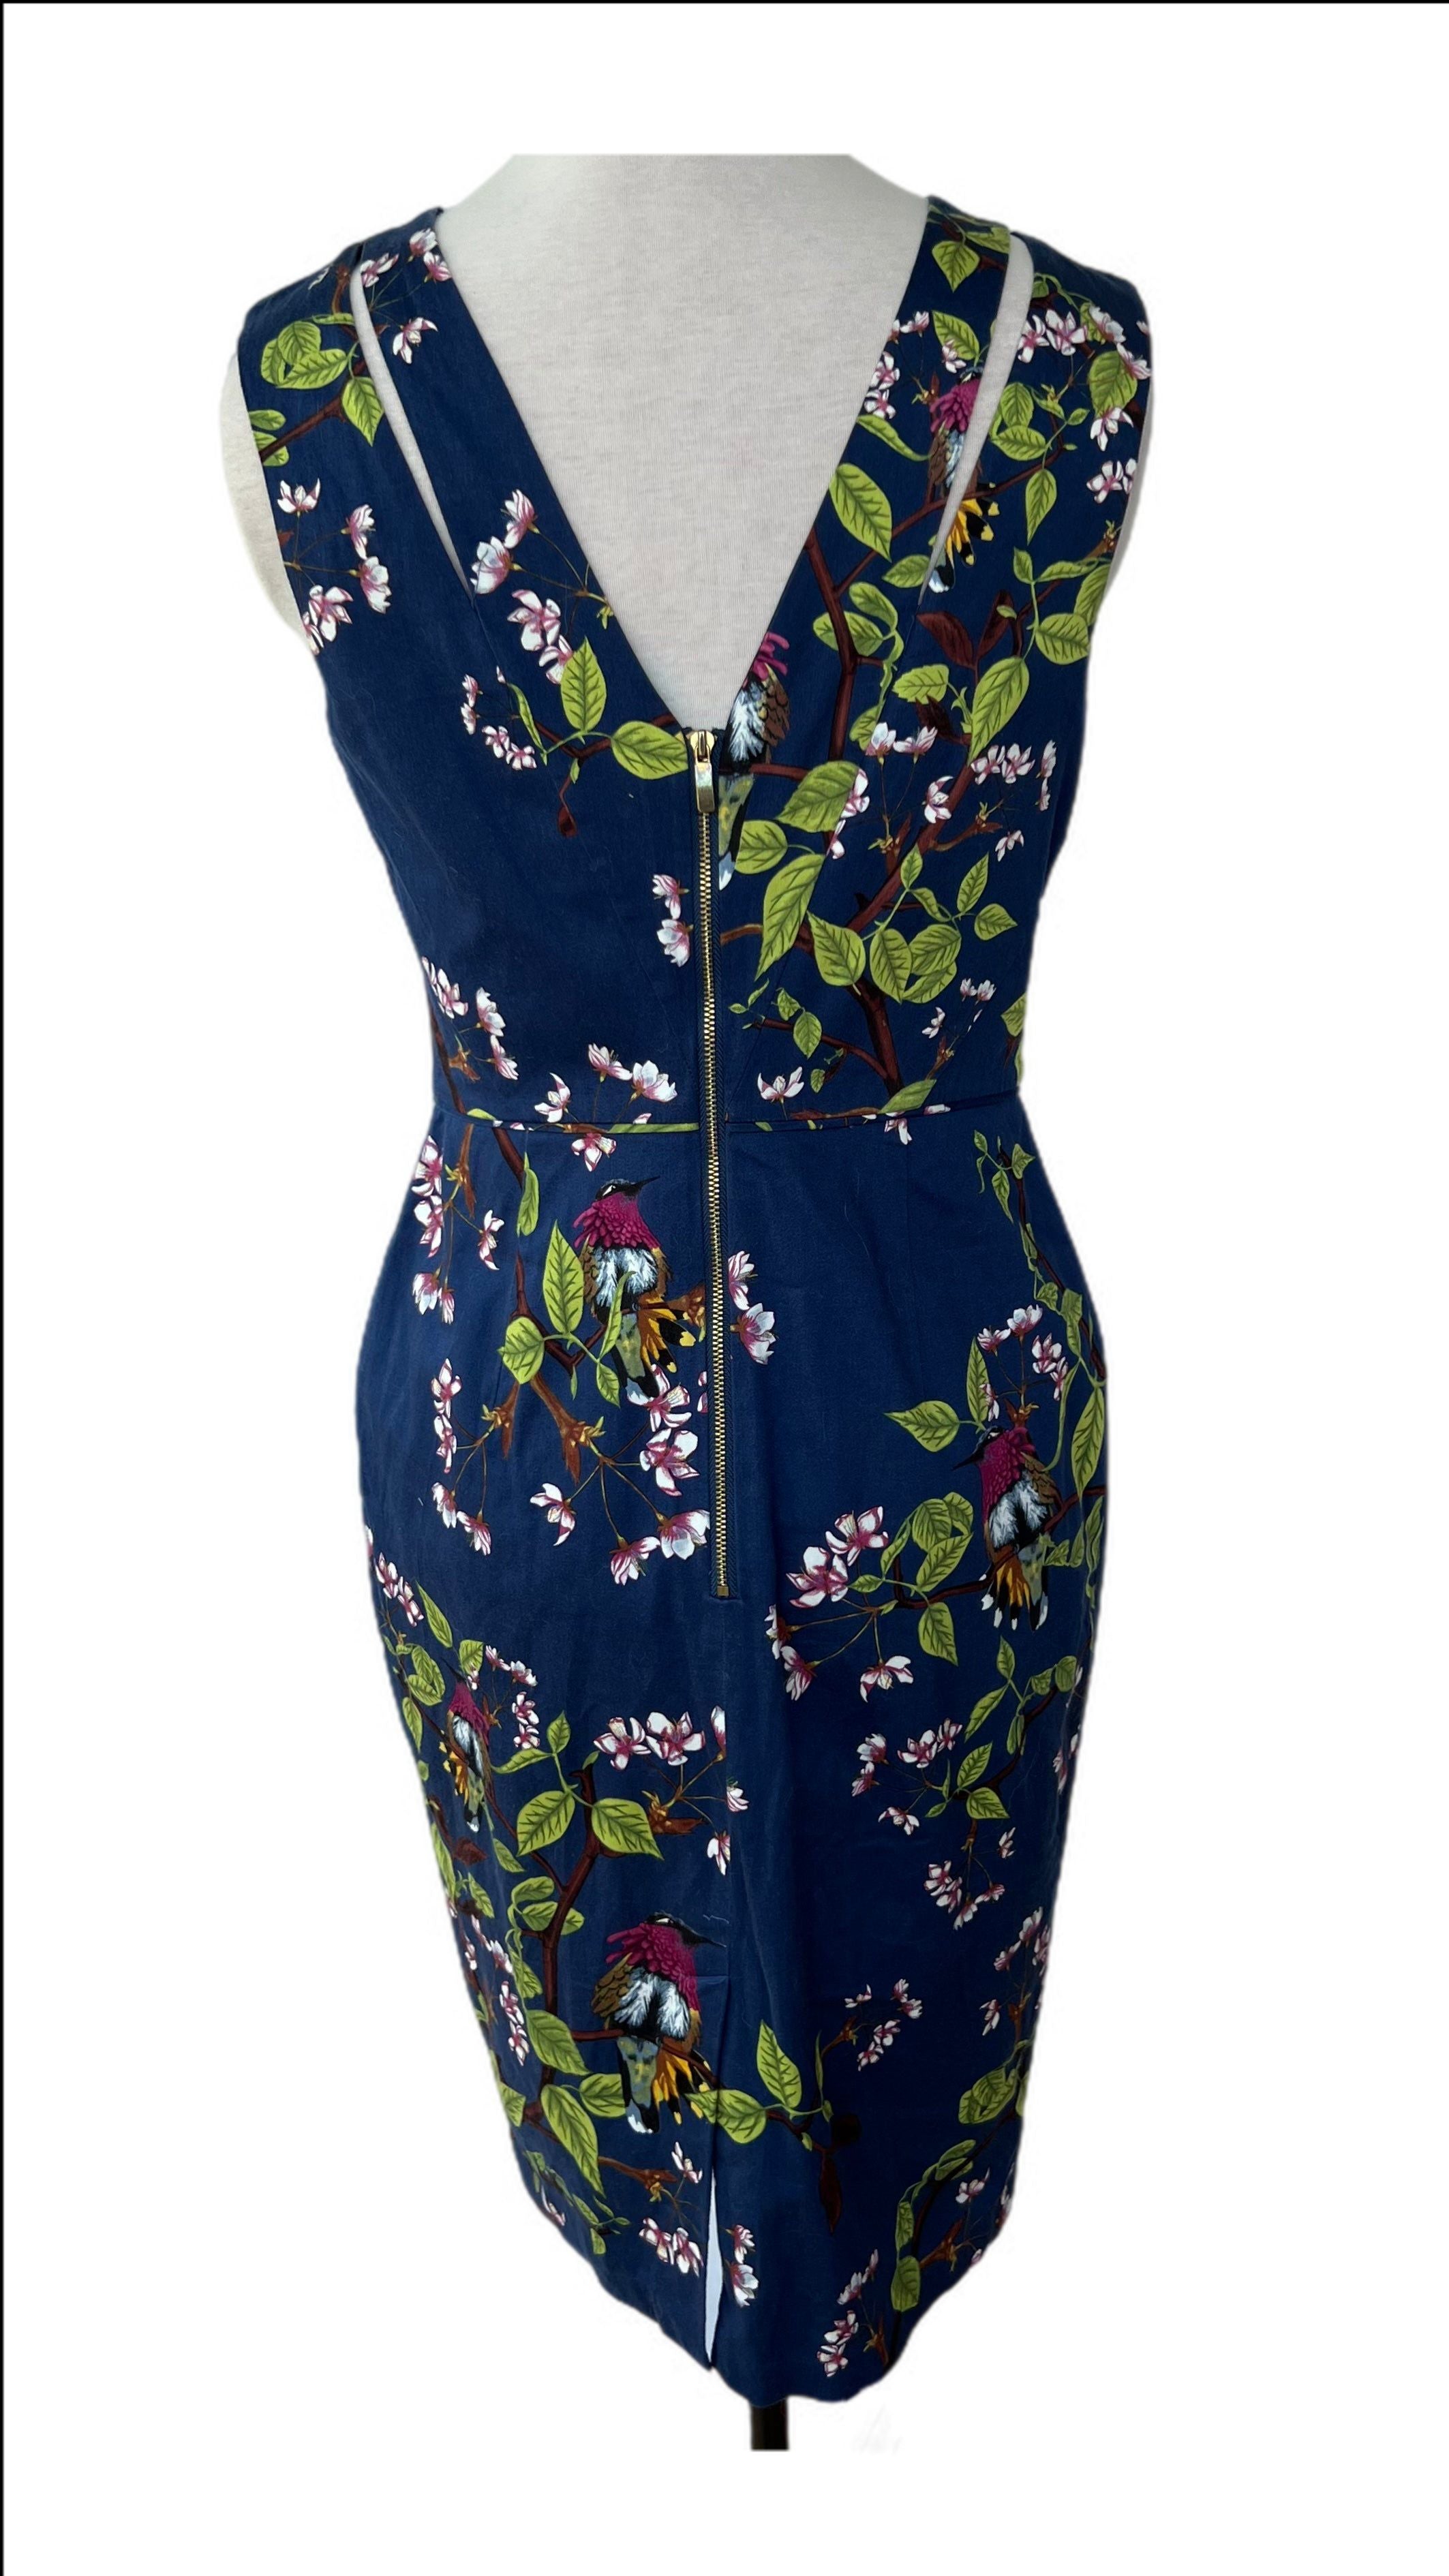 Sleeveless Dress with Bird on a Branch Detail and copper zipper at back